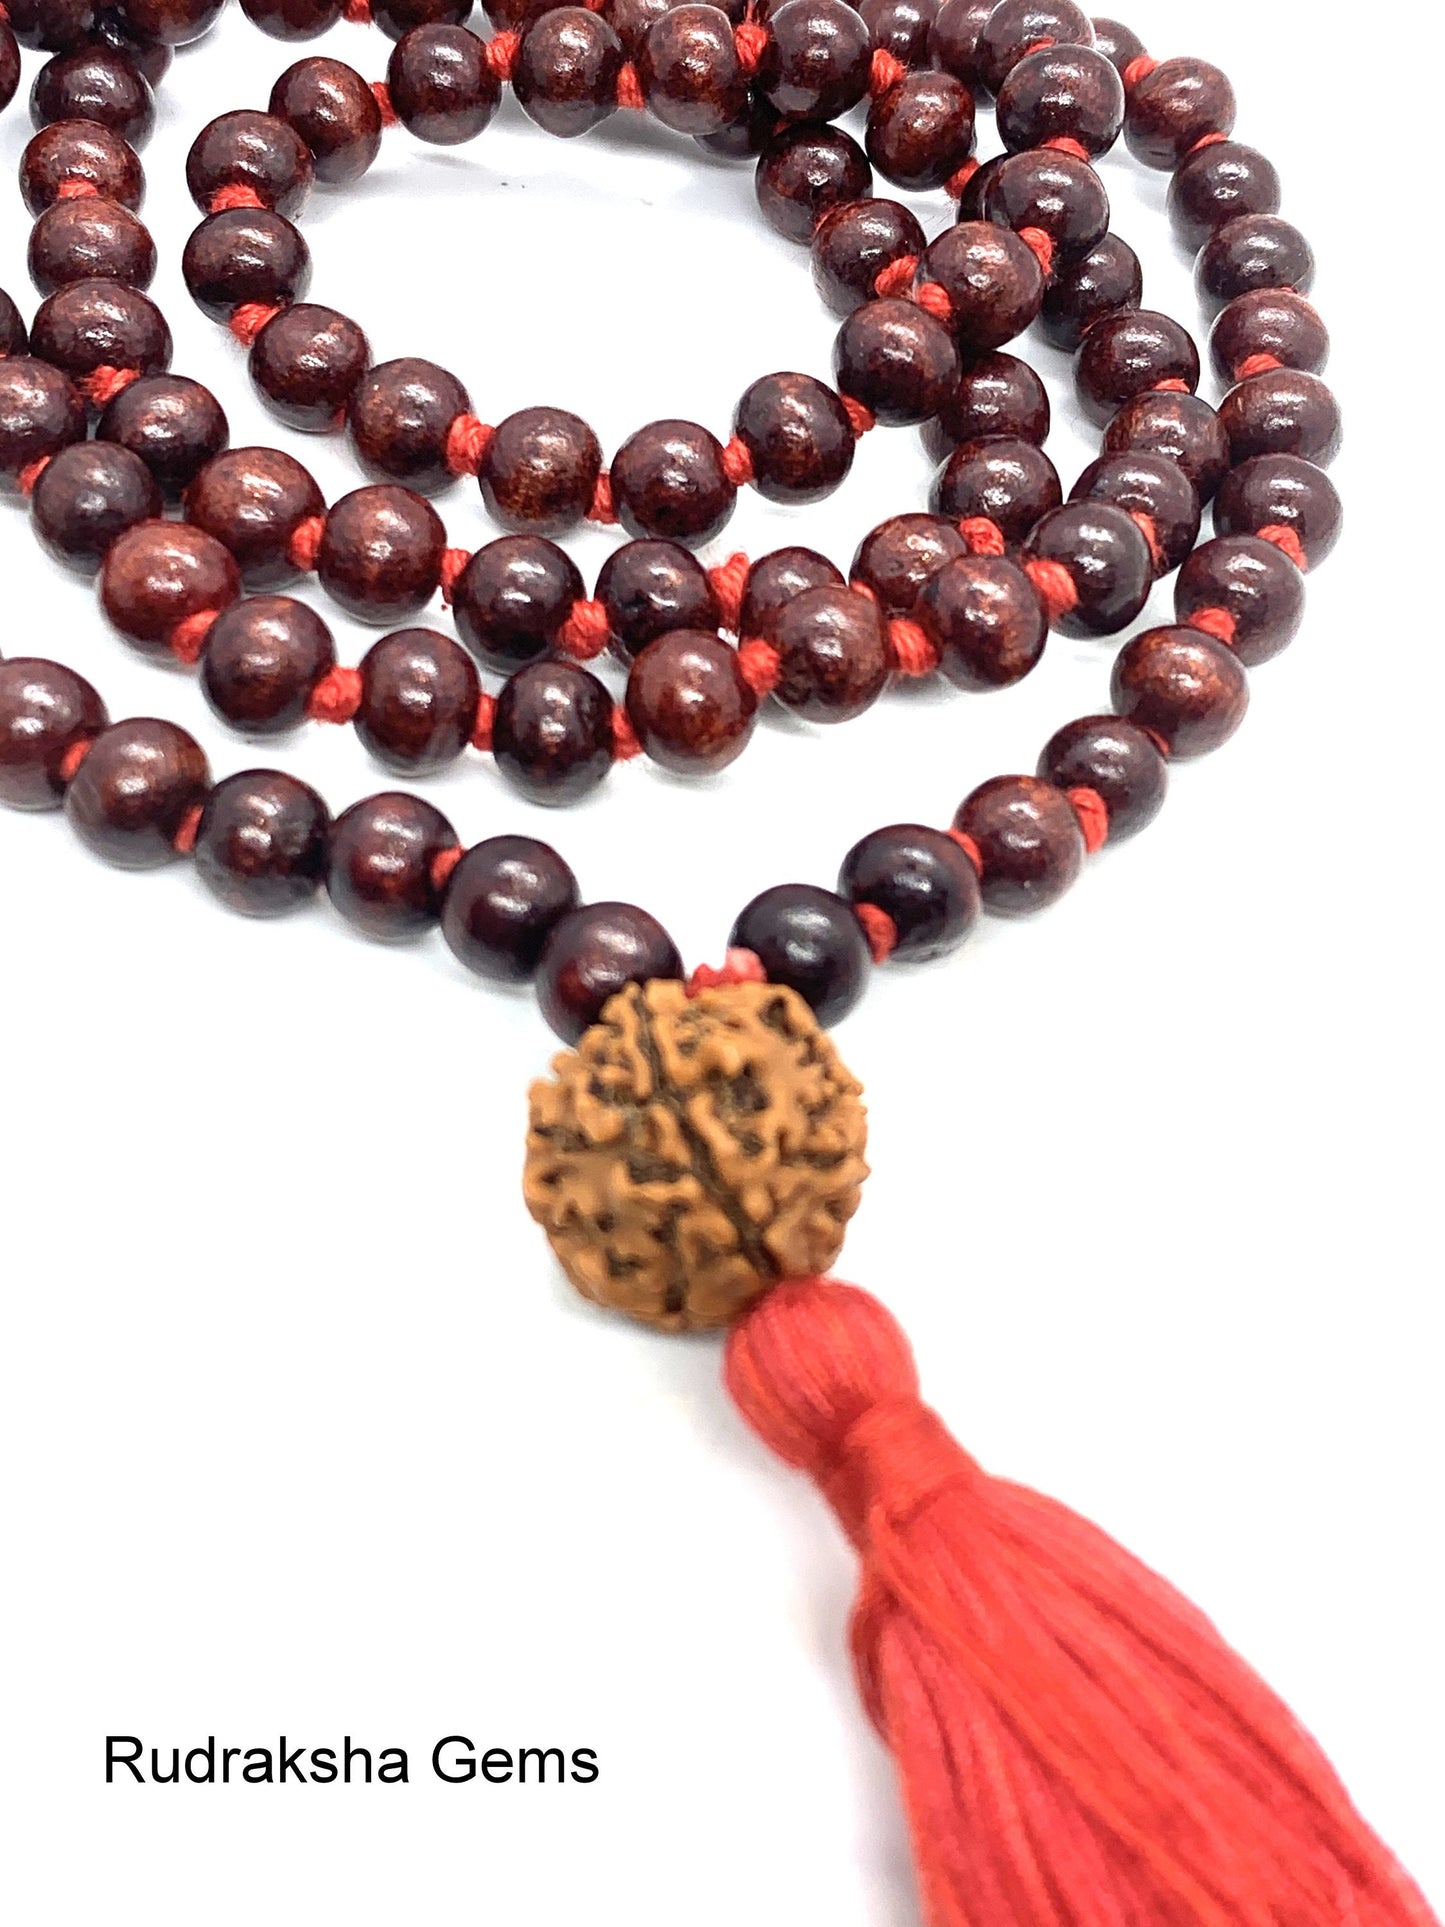 Classic 108 Knotted Meditation Mala with Rudraksha Guru bead | 8mm Indian Rosewood with Red / Cotton String Tassel | Elegant Yoga Necklace